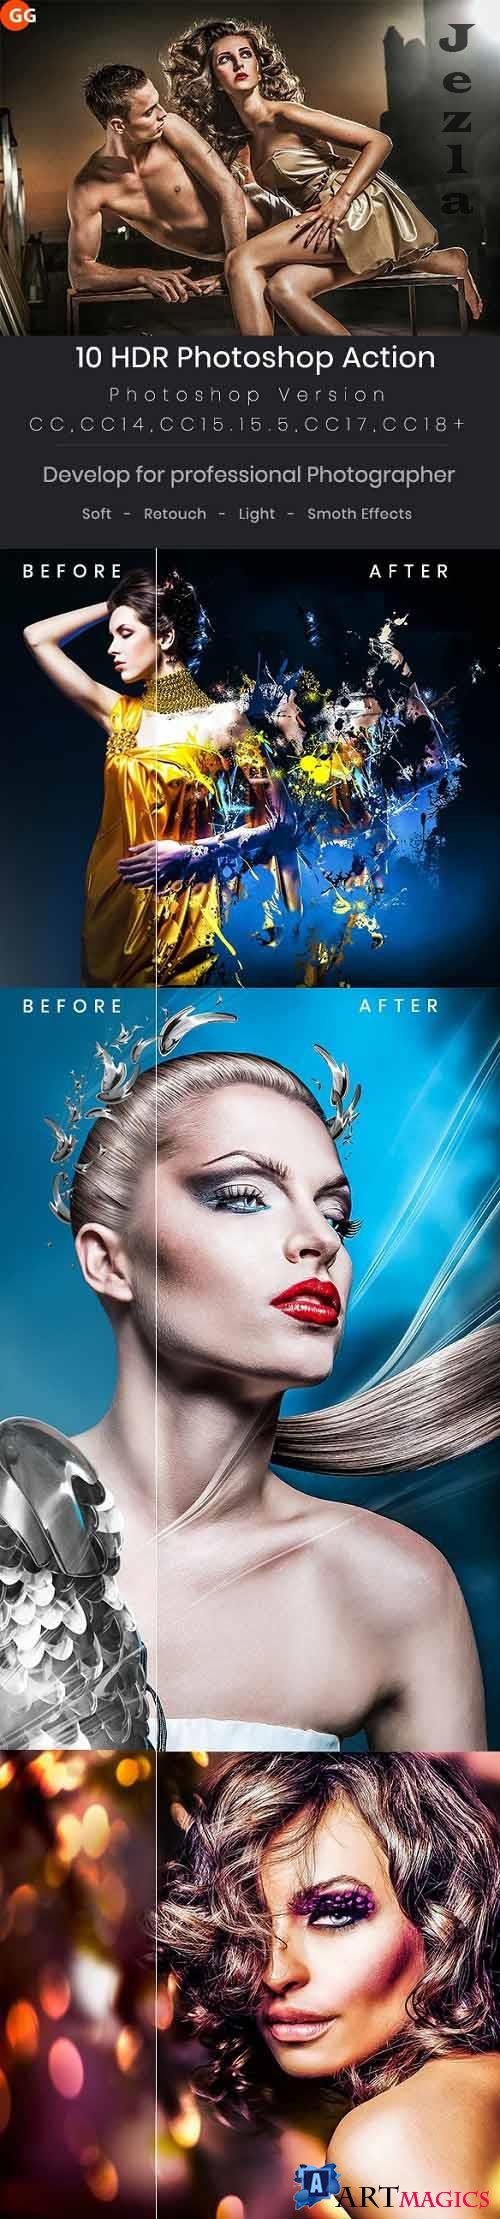 10 HDR Photoshop Action - 21960564